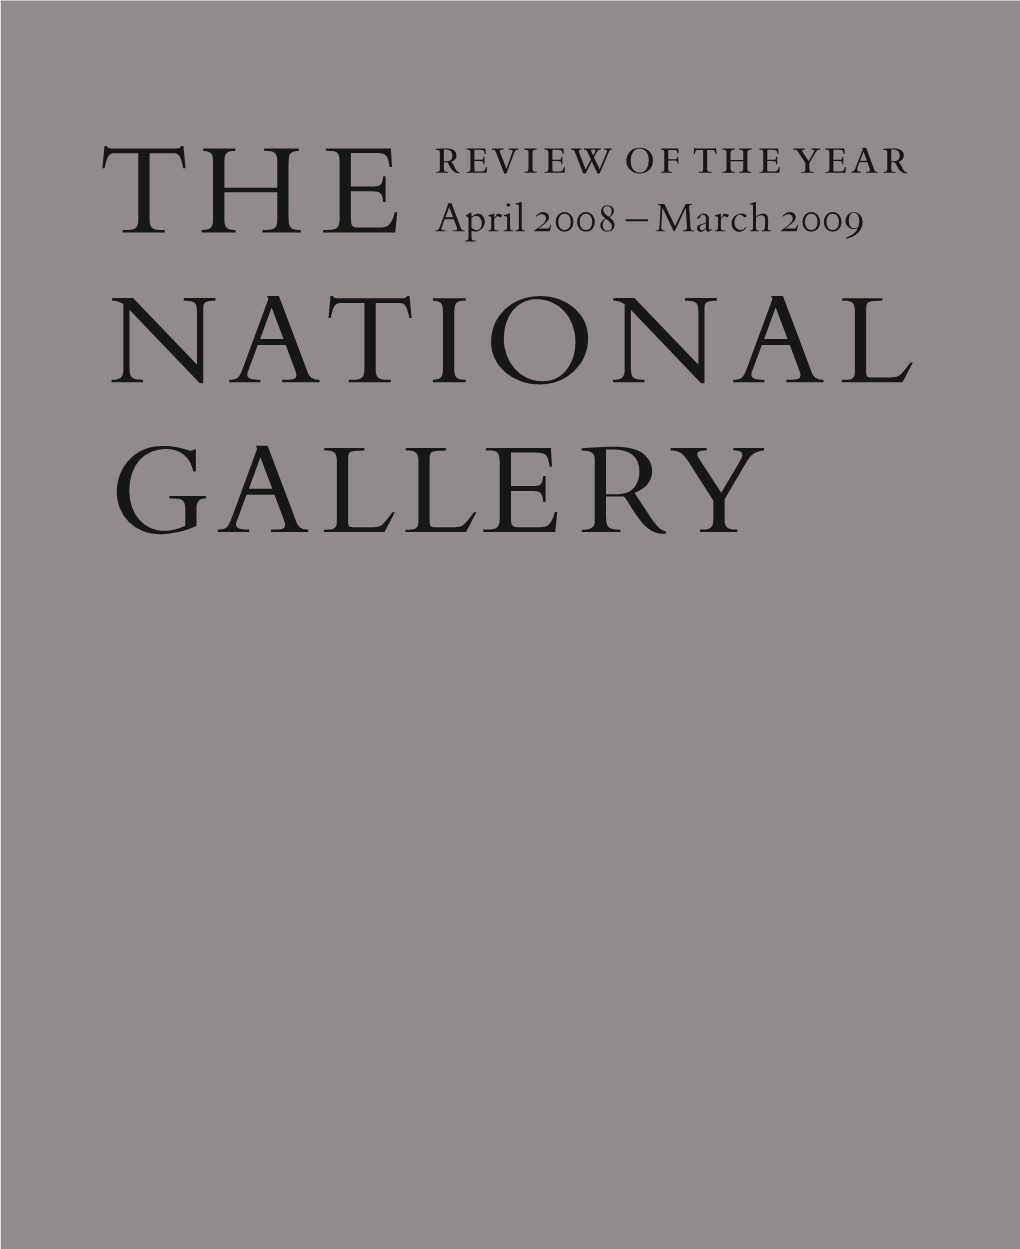 Review of the Year the April 2008 – March 2009 NATIONAL GALLE�Y